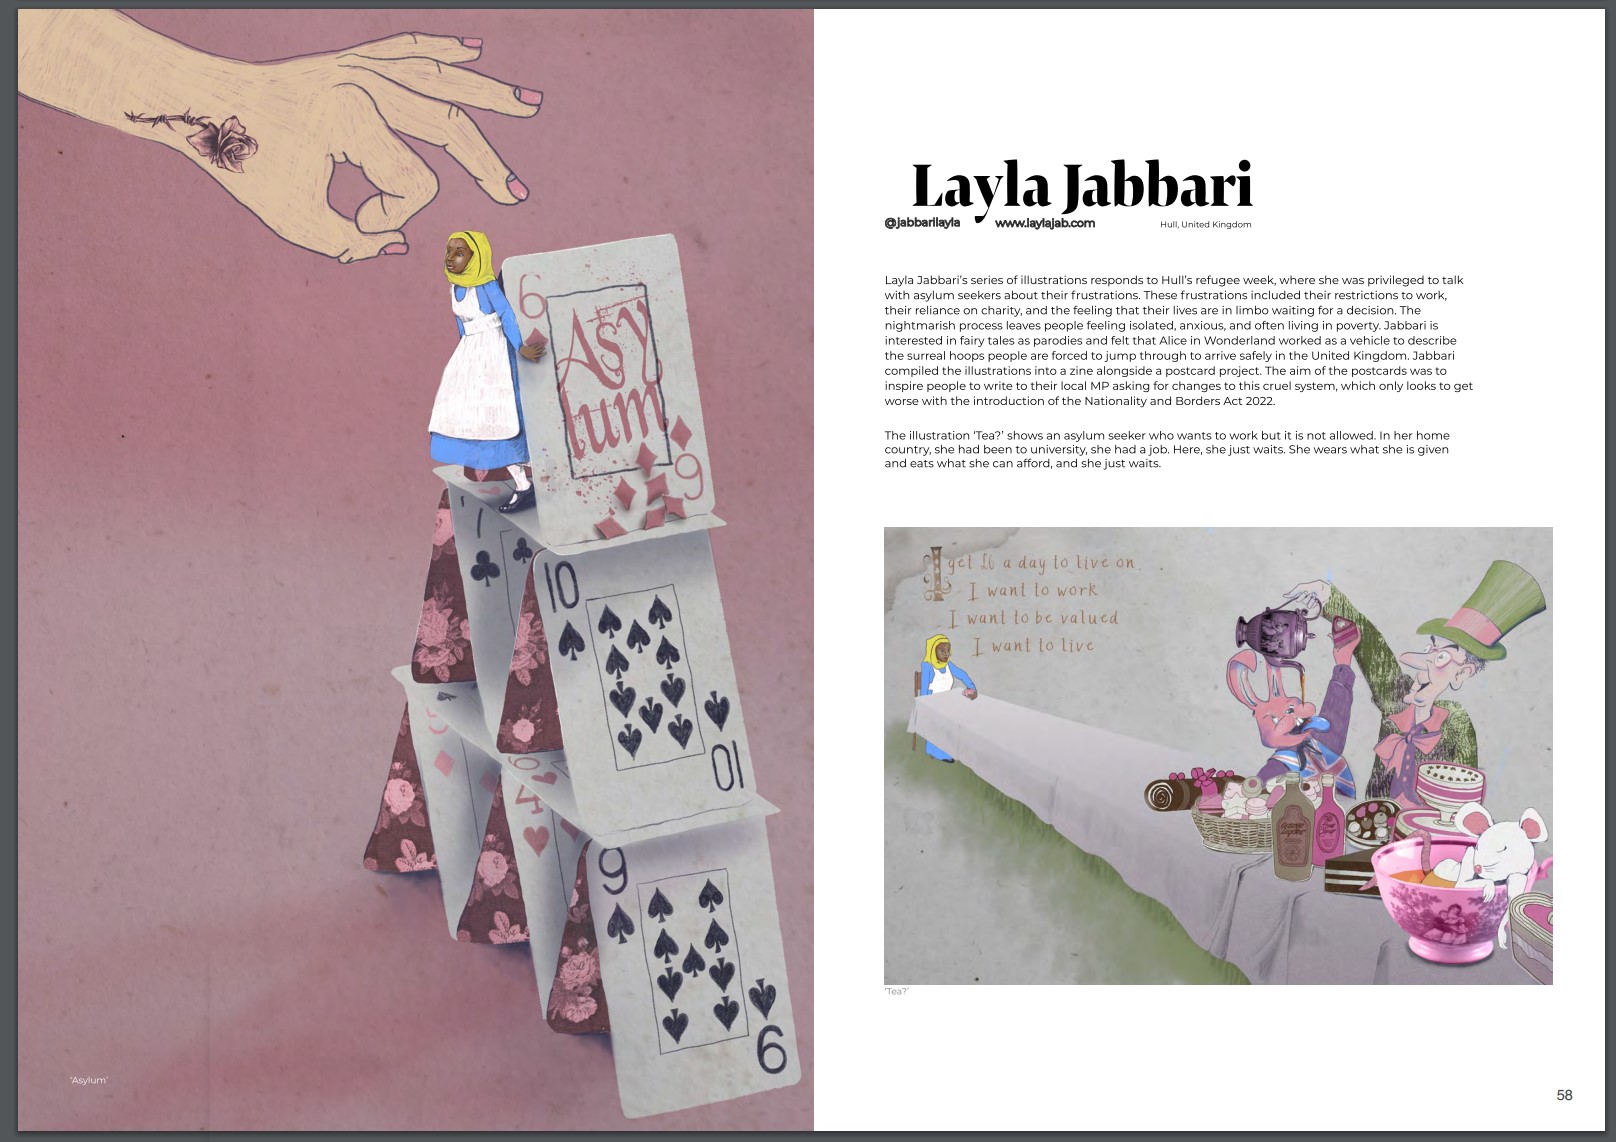 Details of article in the magazine 'Artists Responding To'. It shows a picture of Alice on playing cards with a giant hand above her as if to flick her off. Next to this is a summary of the work and a tea party image.